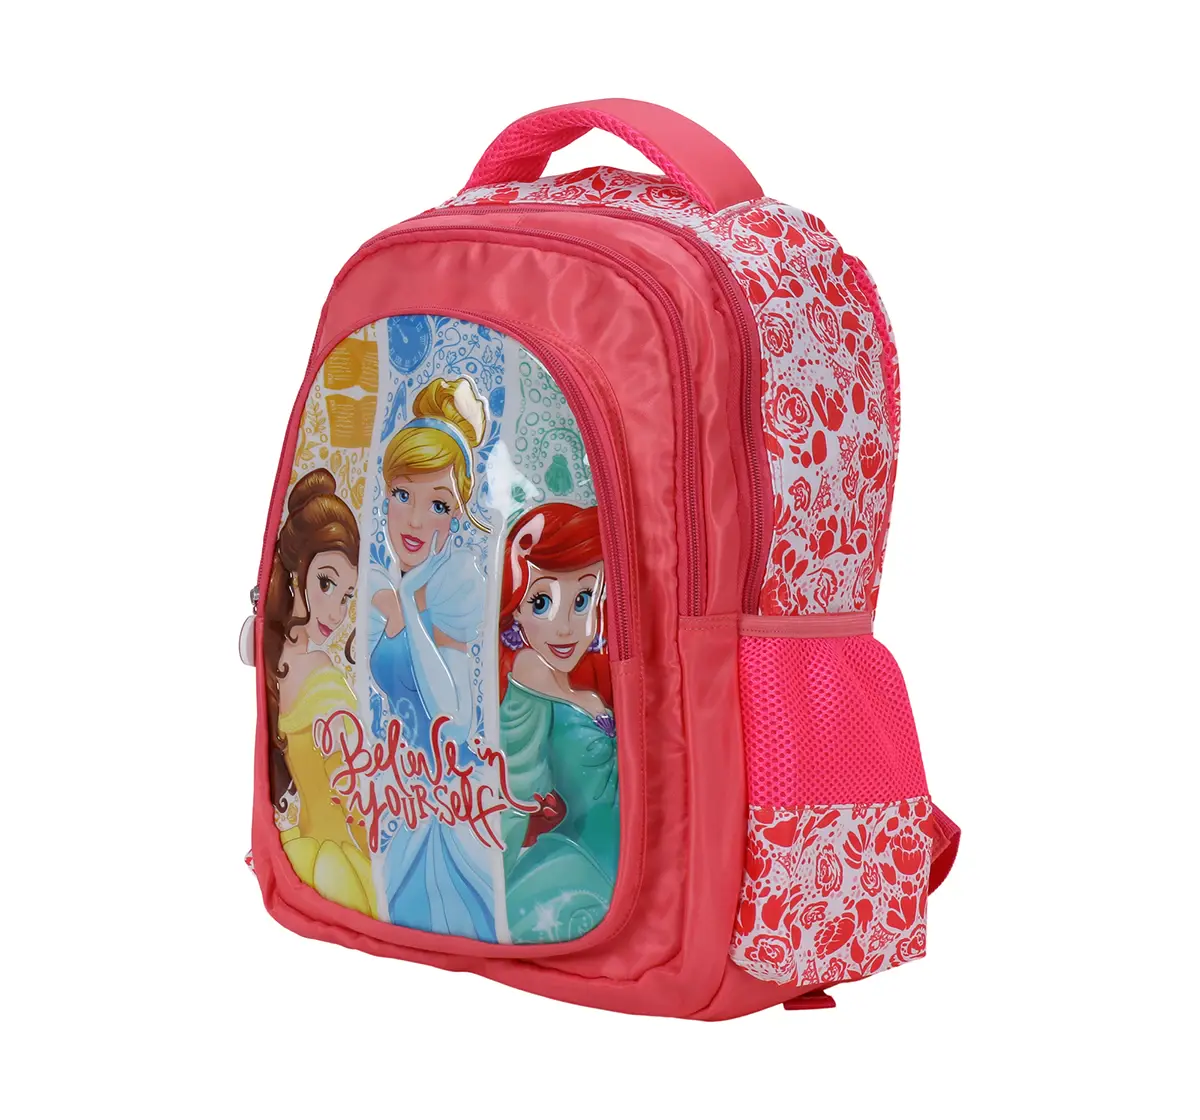 Disney Princess Believe In Yourself 16" Backpack Bags for age 3Y+ 